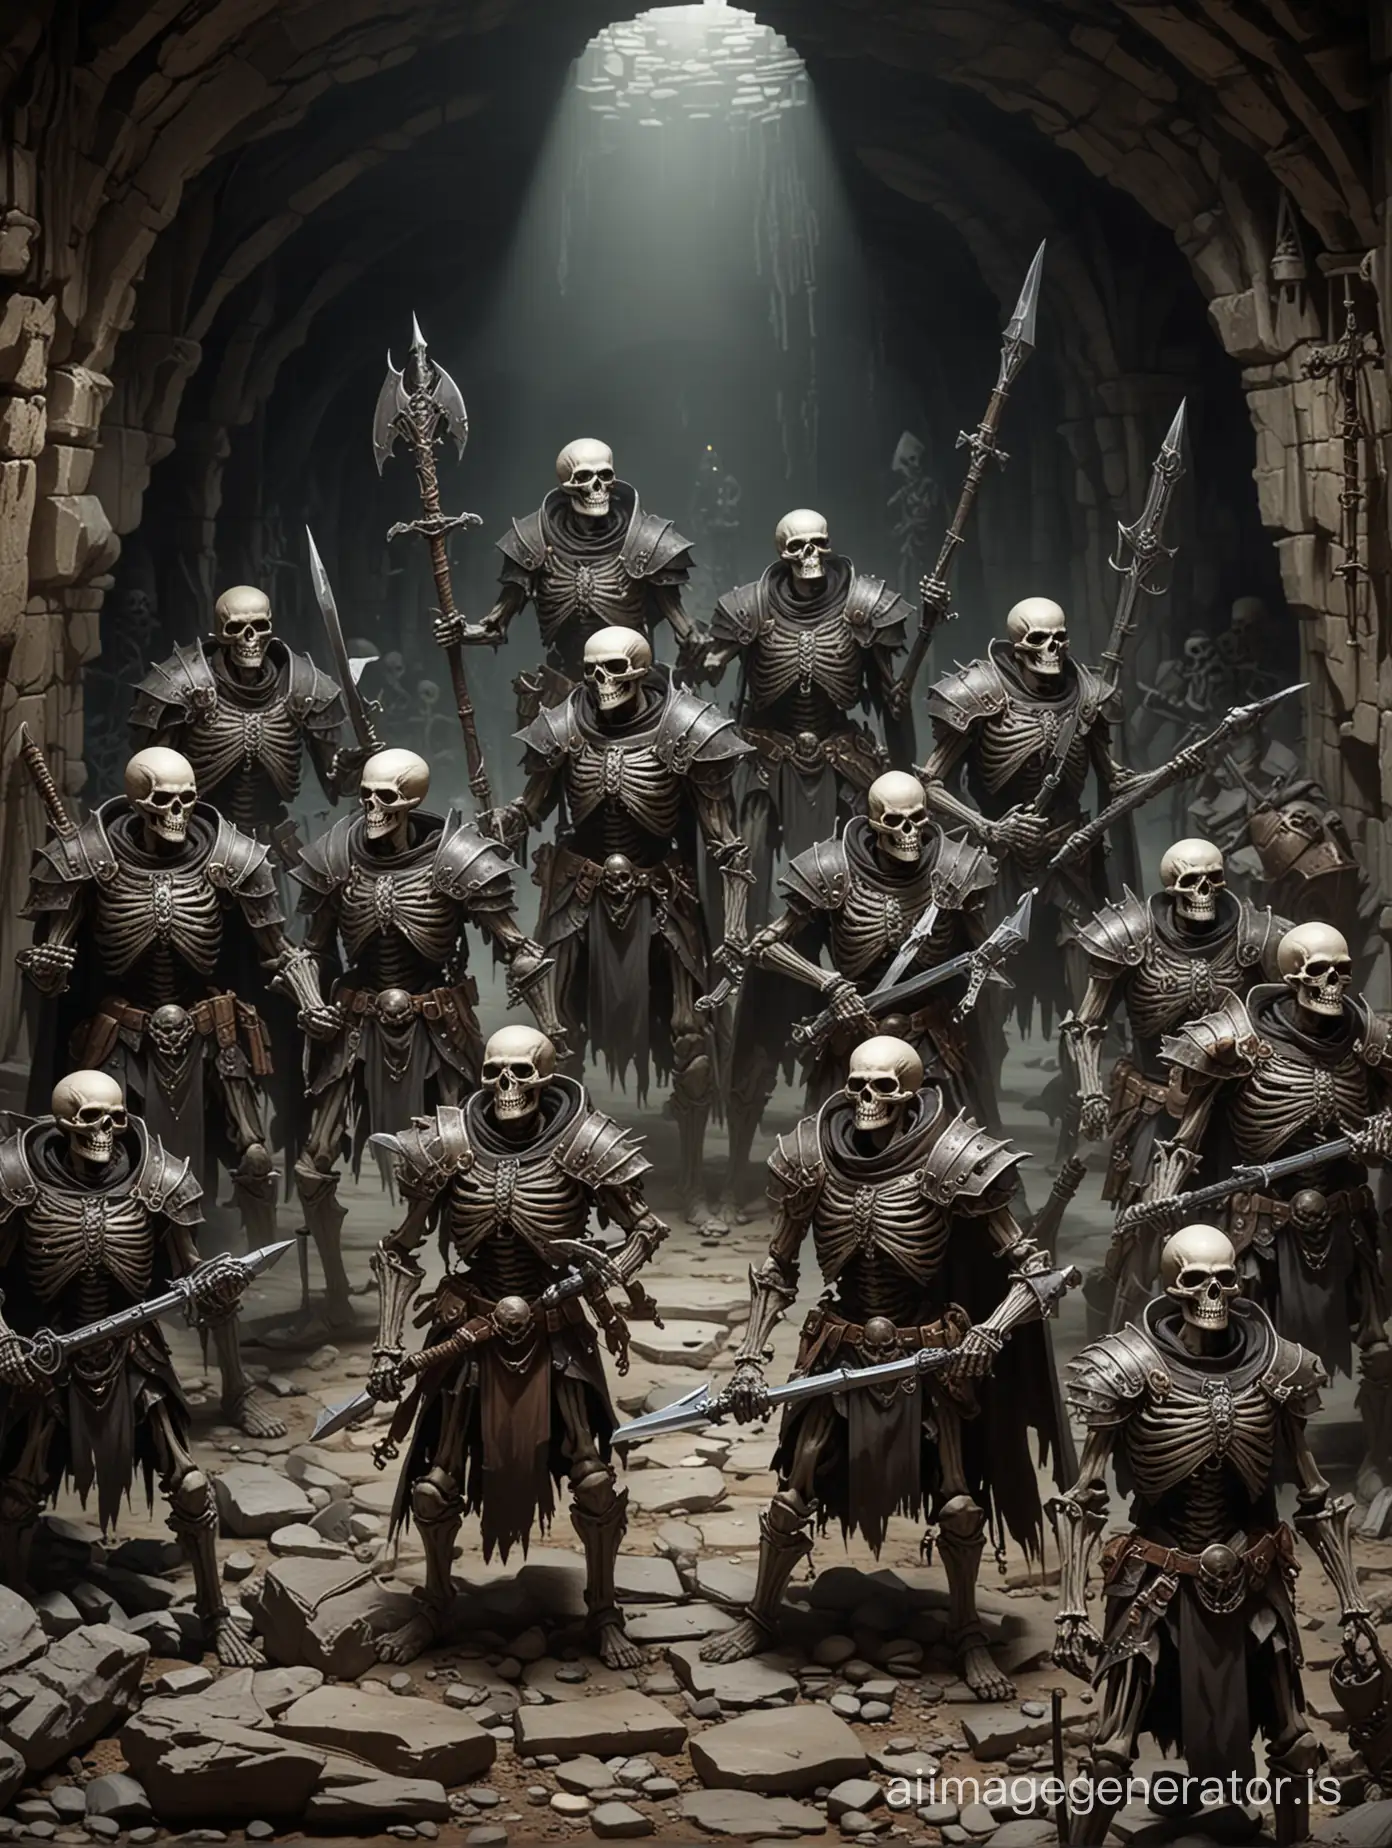 Fantasy-Dungeons-Dragons-Scene-Nine-Skeletons-Armed-with-Weapons-and-Armor